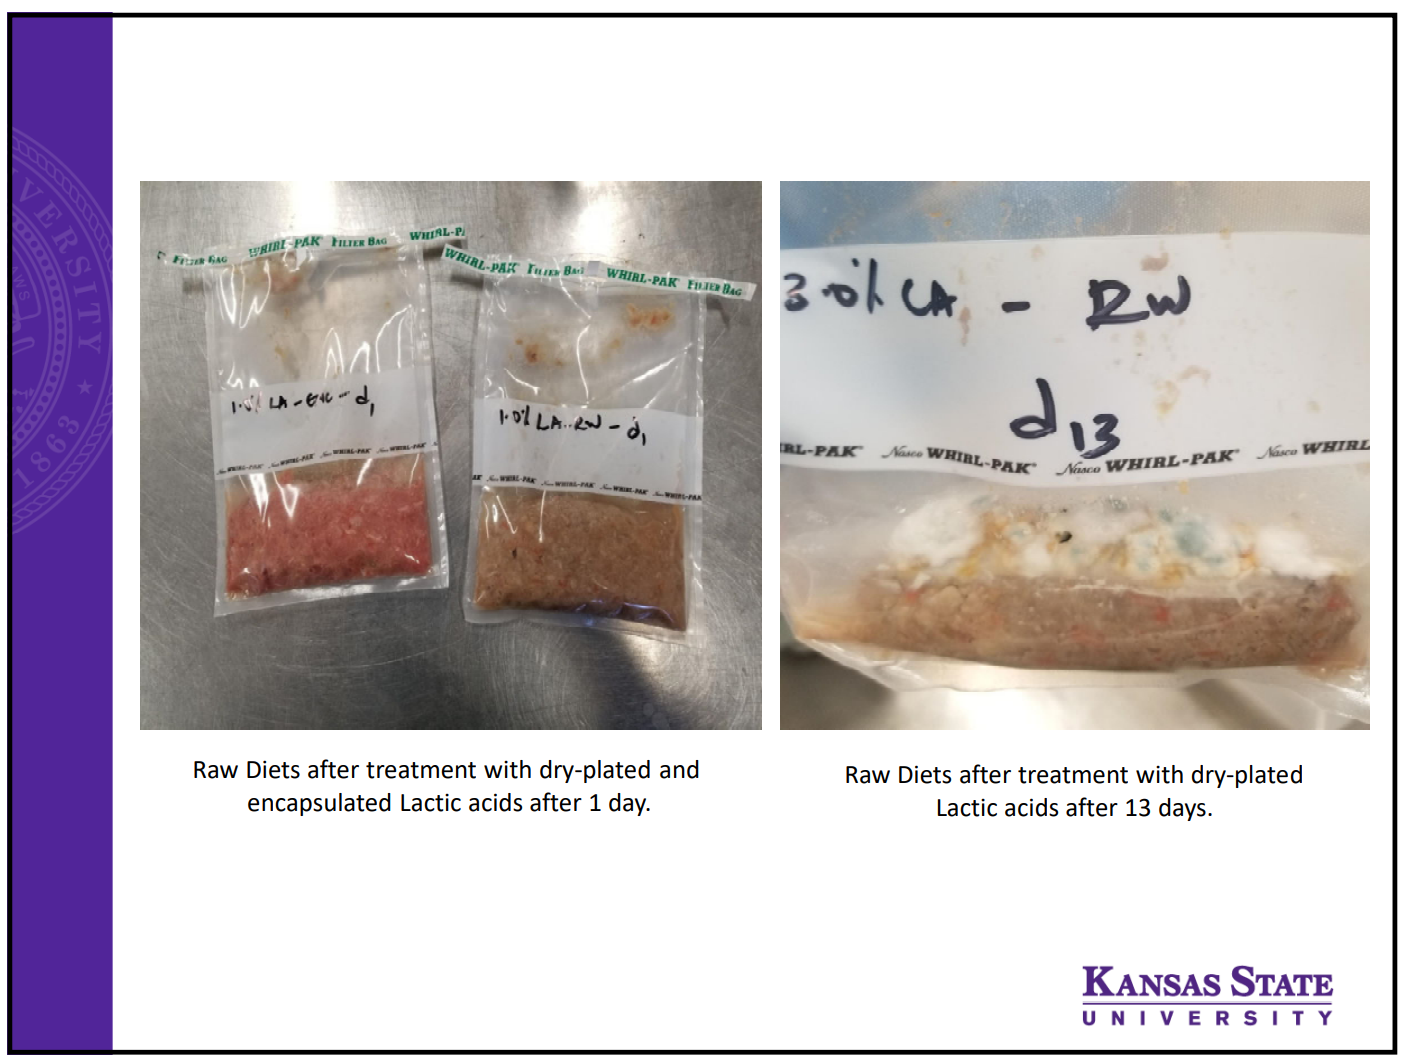 Discoloration of raw dog food with encapsulated lactic acid versus raw lactic acid additives